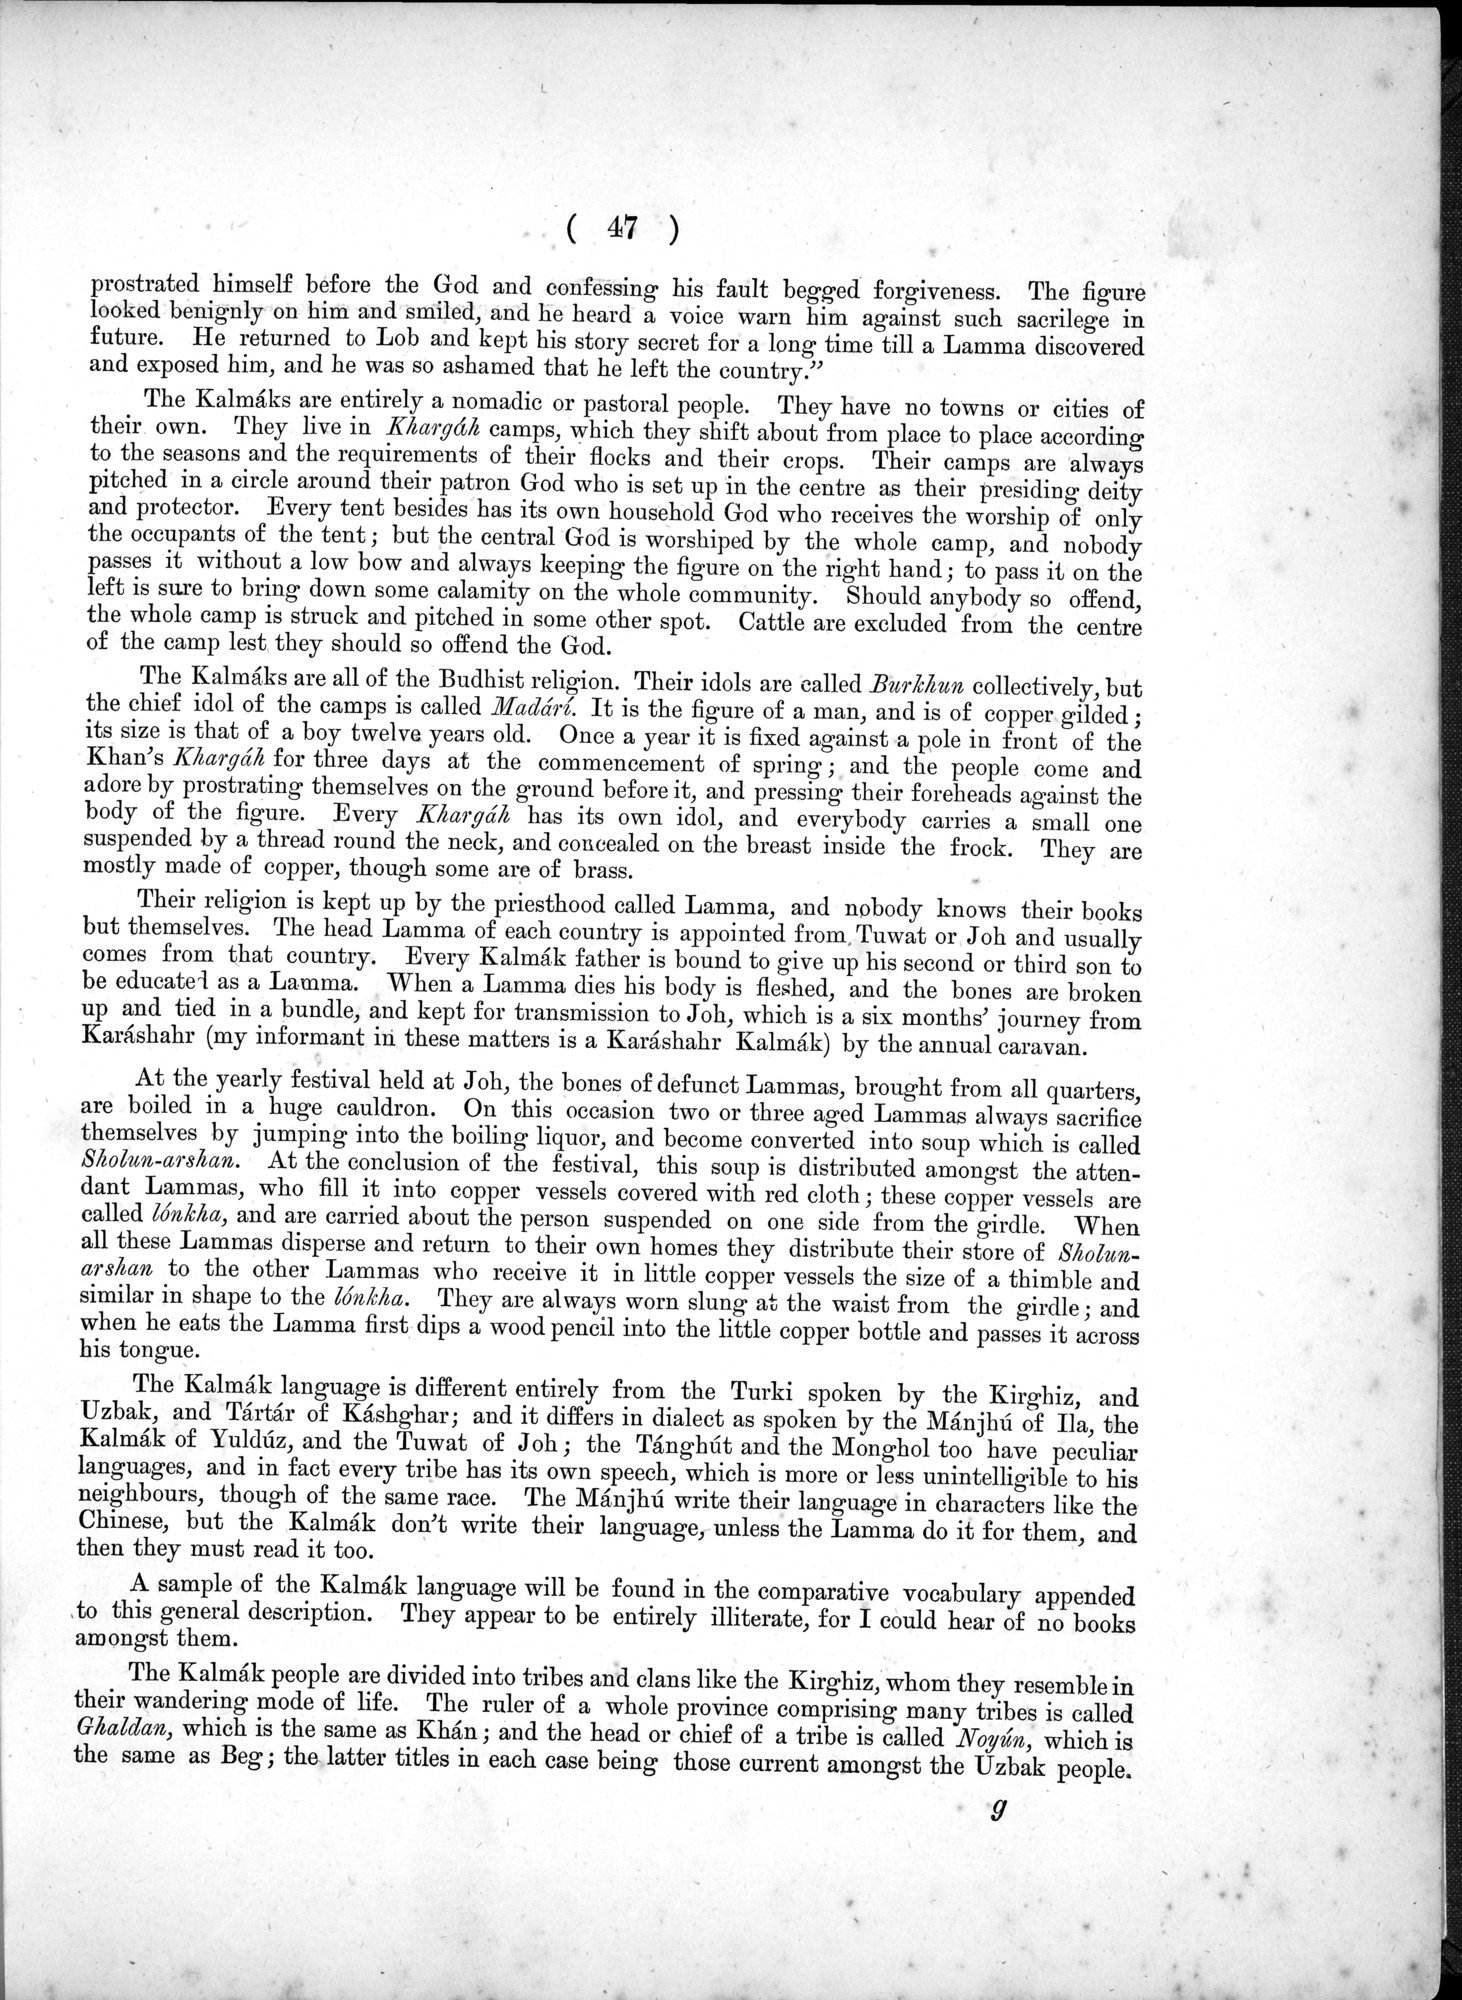 Report of a Mission to Yarkund in 1873 : vol.1 / Page 85 (Grayscale High Resolution Image)